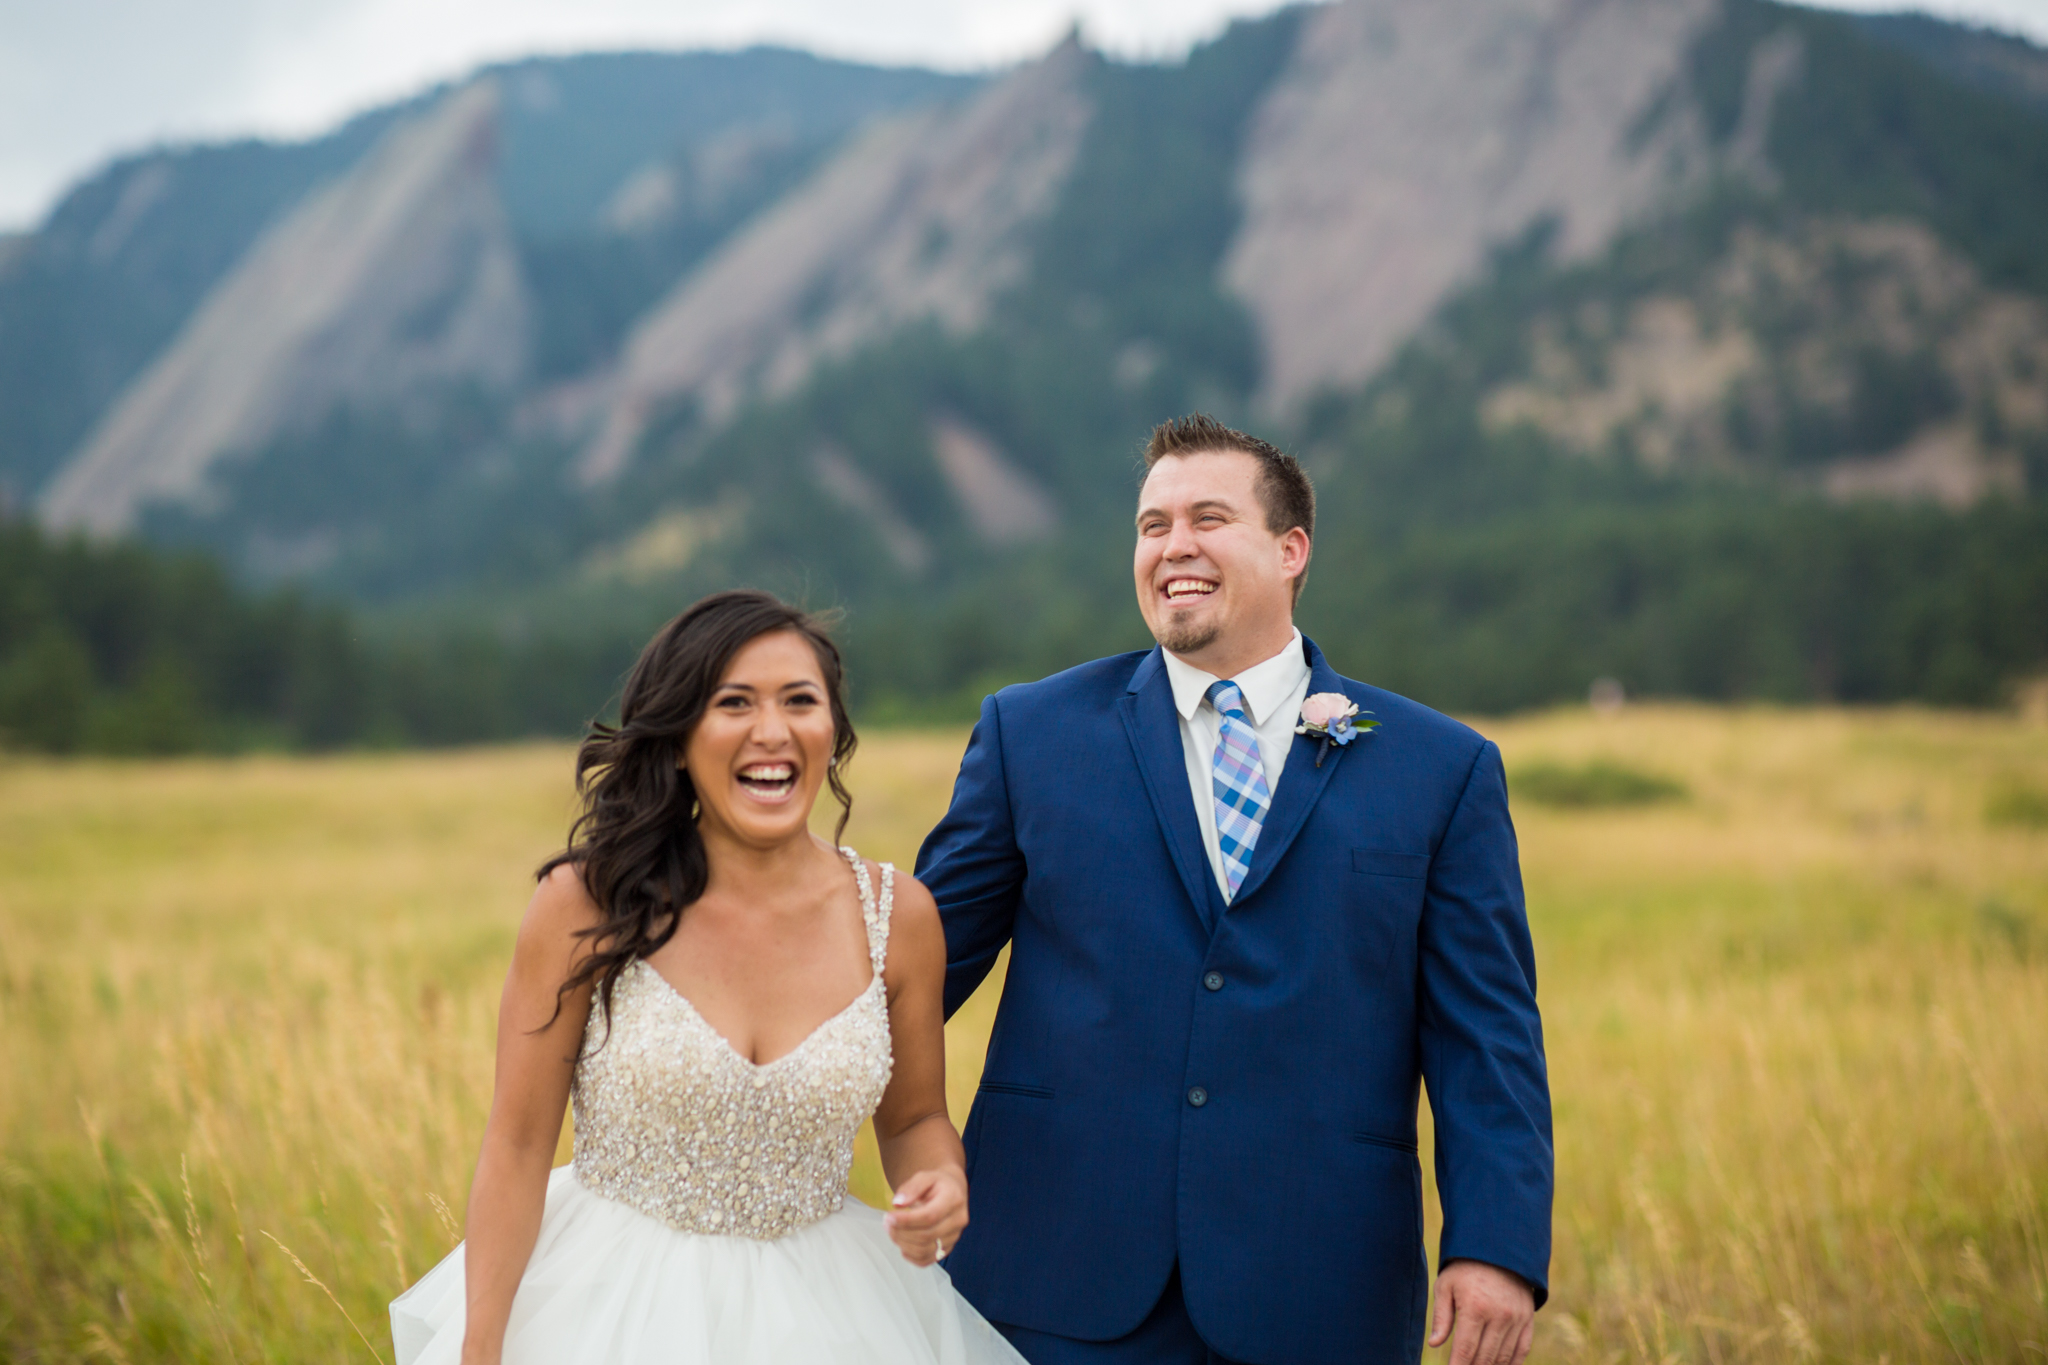 adorable candid bride and groom portrait on wedding day at chautauqua park in boulder colorado